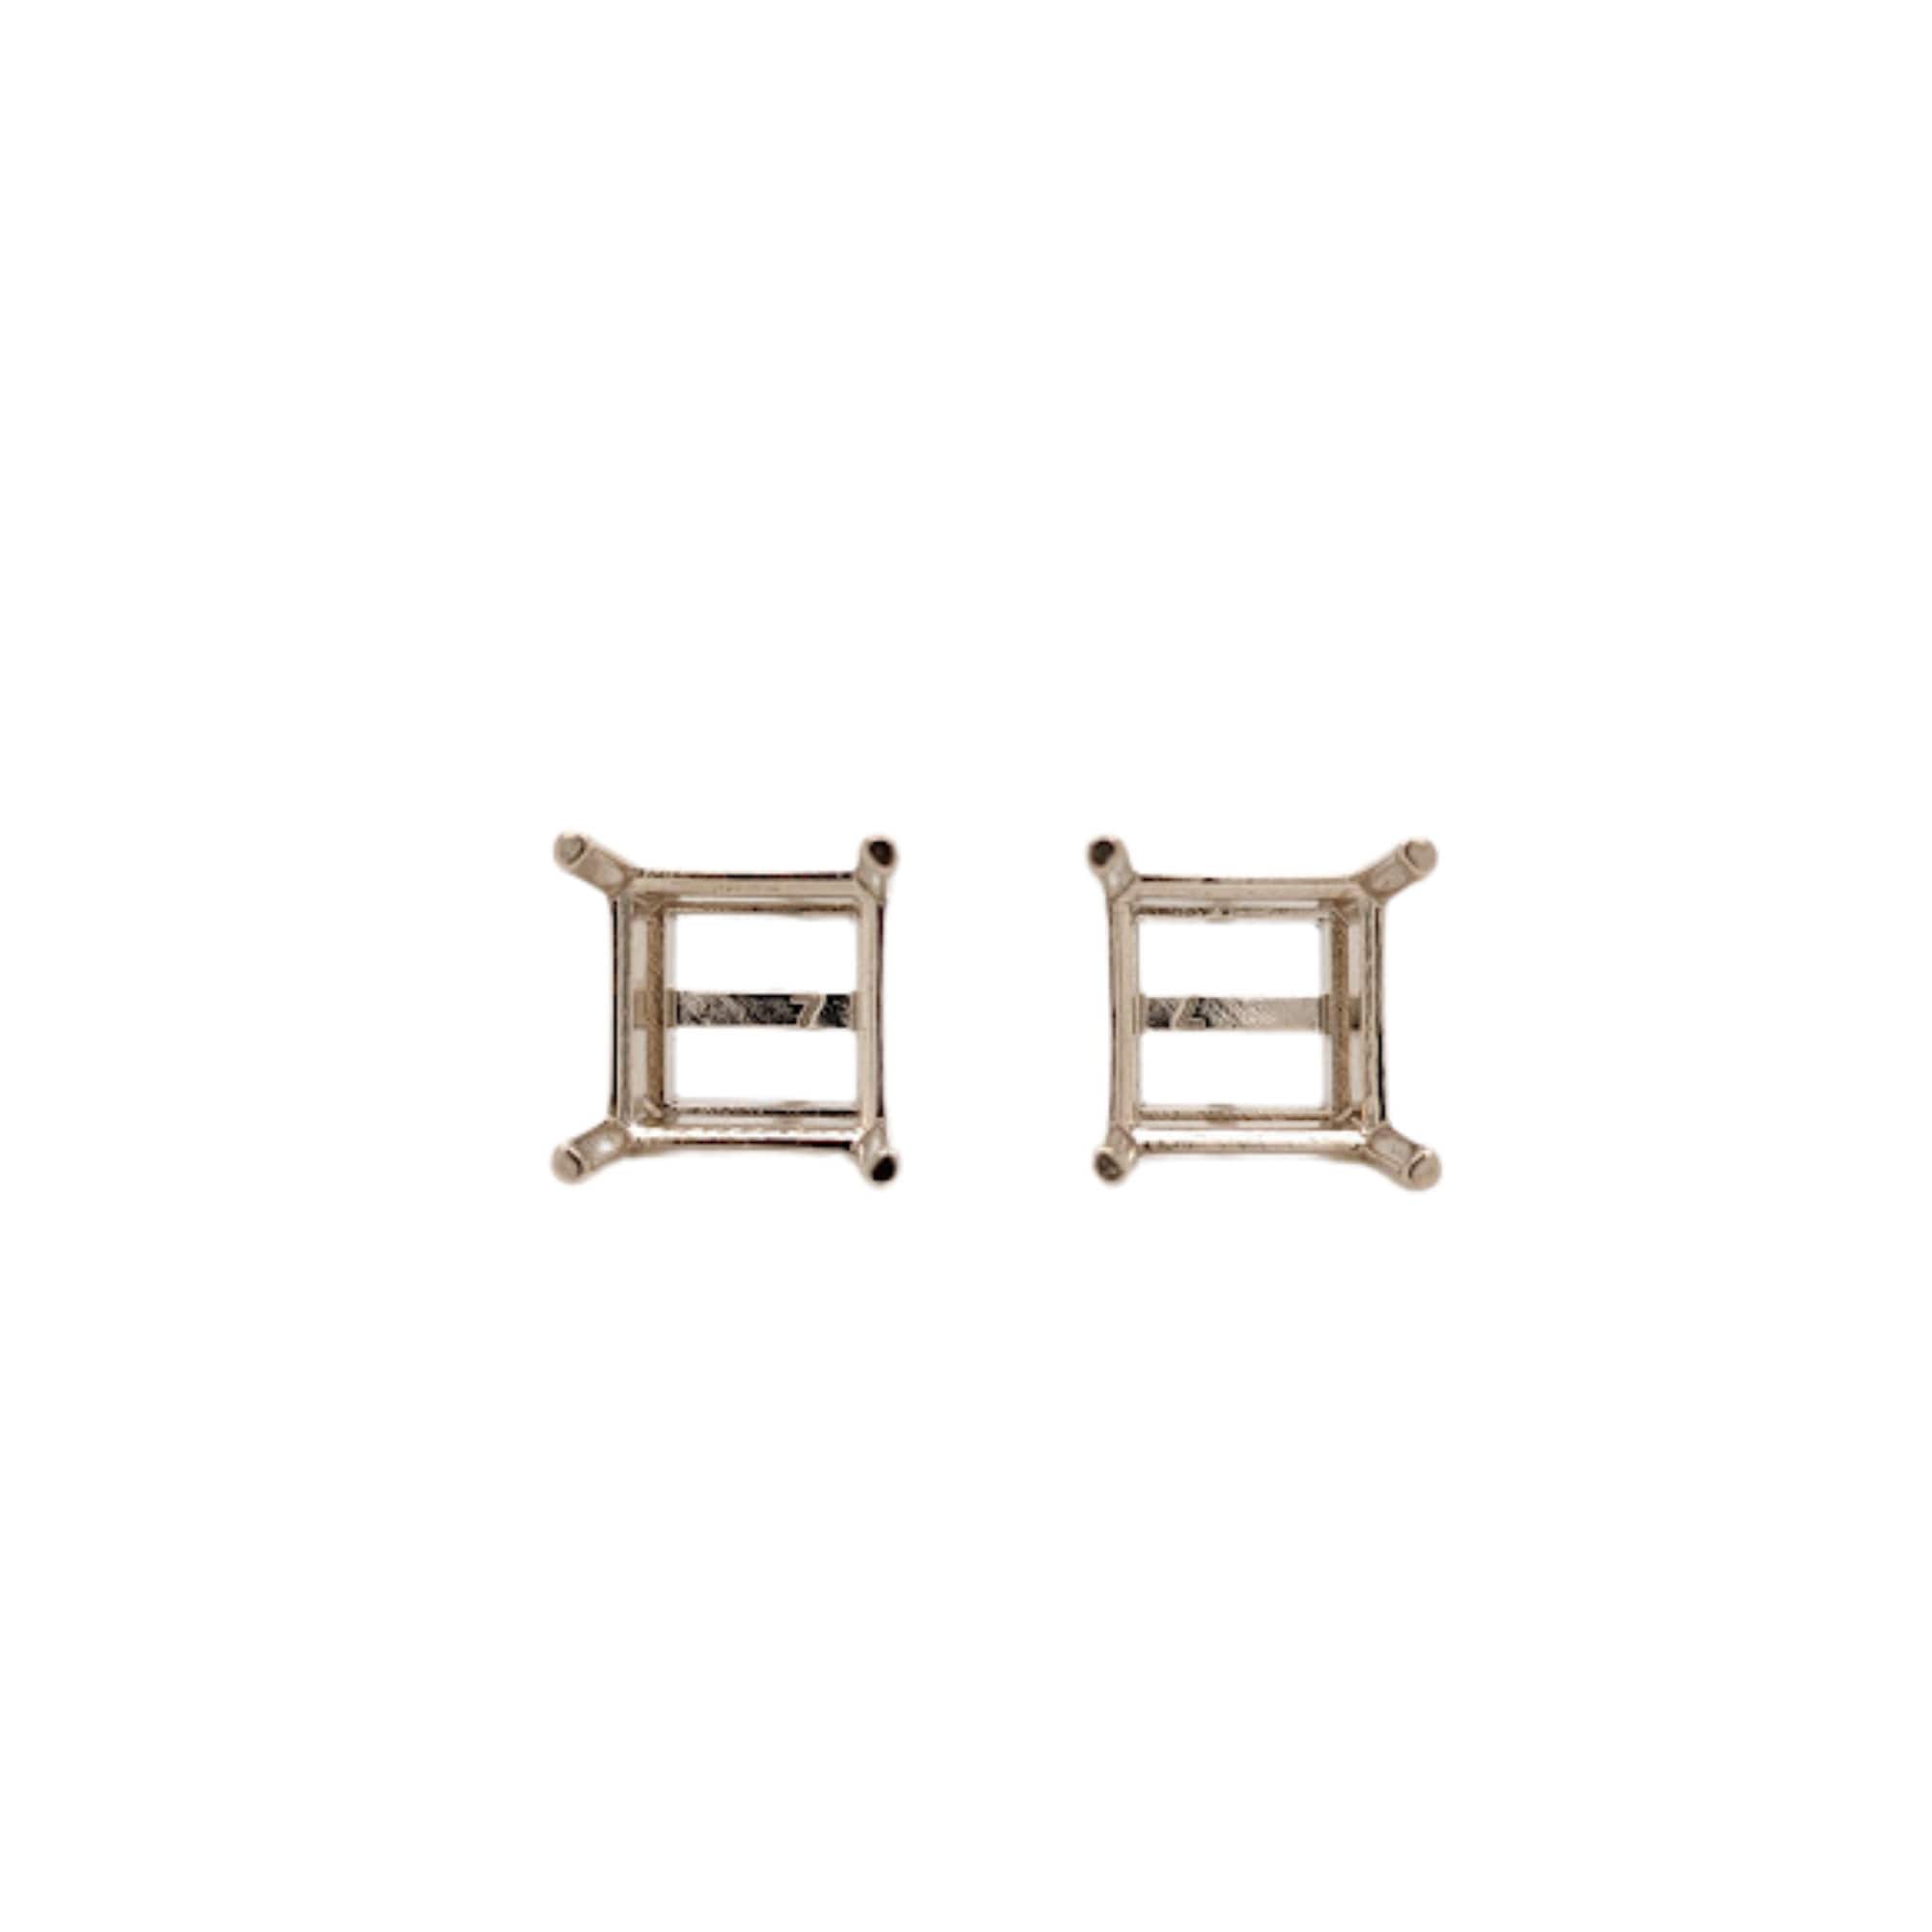 Square Cushion Princess Cut Earring Studs, Findings, Baskets, Prongs in 14K Solid Gold | 4mm 5mm 6mm 7mm 8mm 9mm | Solitaire Studs | America